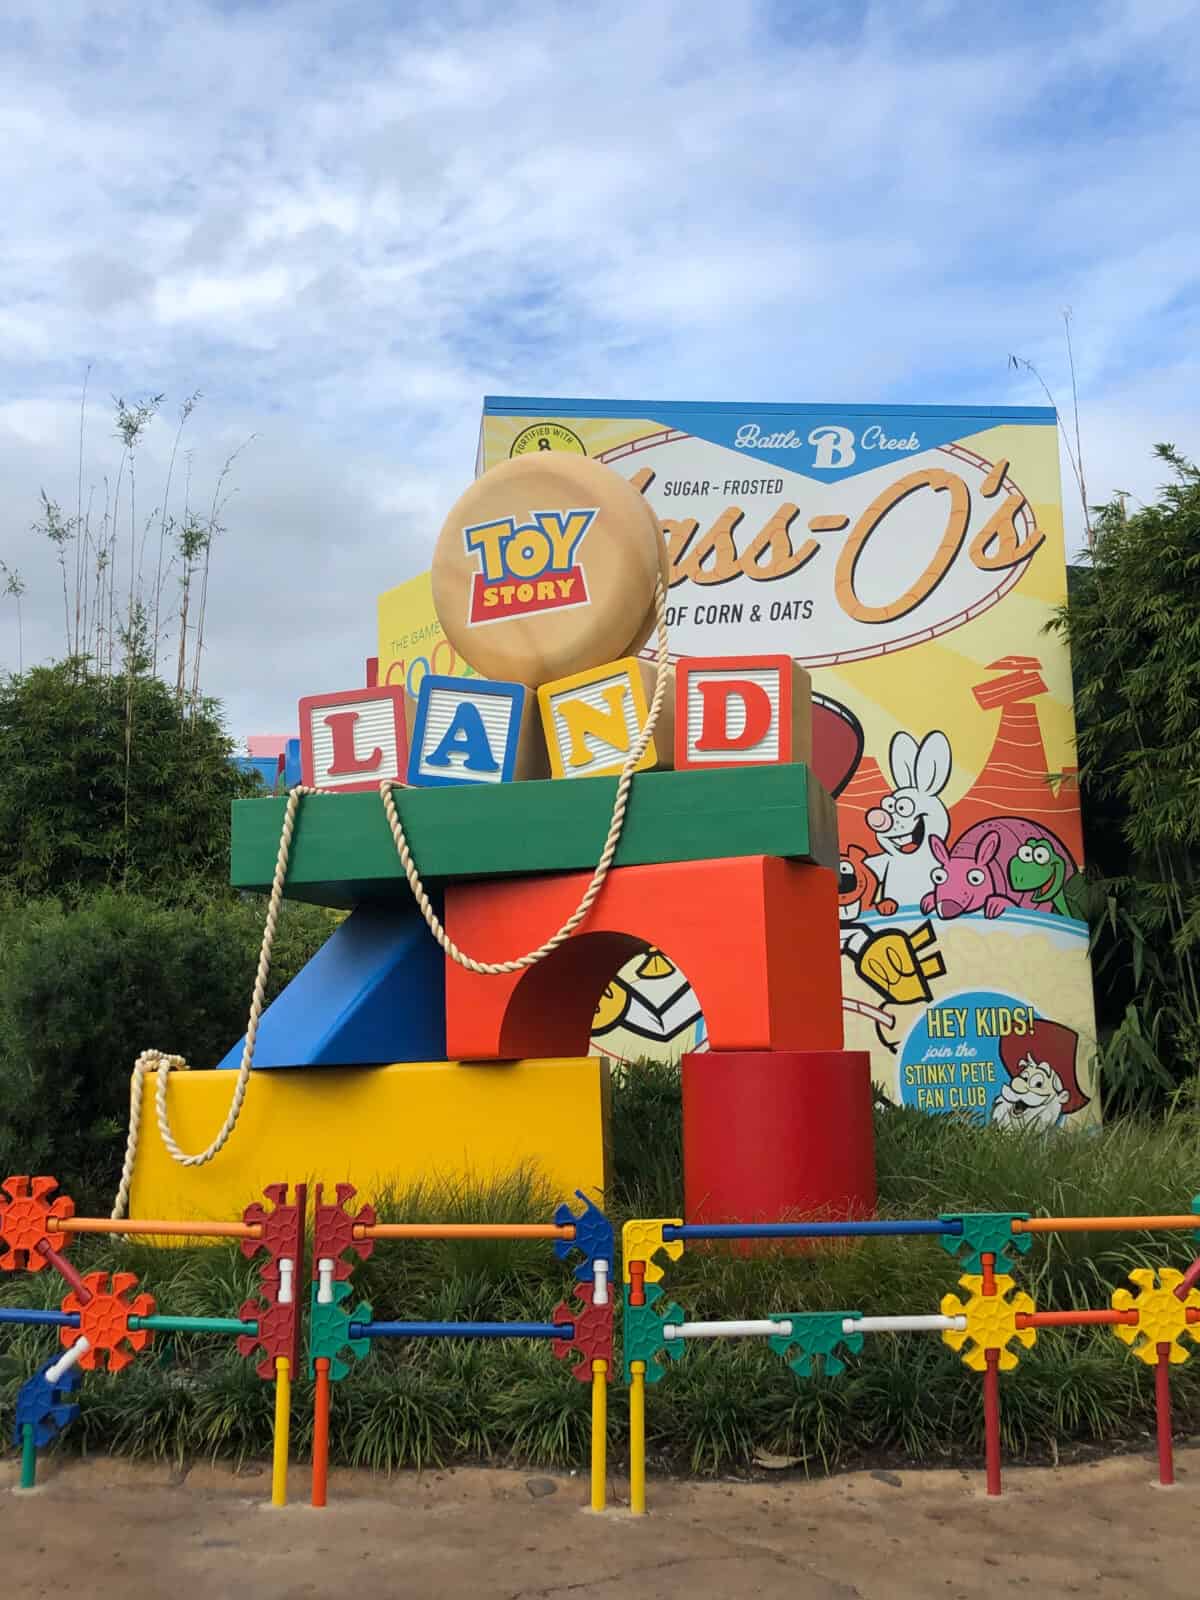 Toy Story Land is a must for Pixar fans